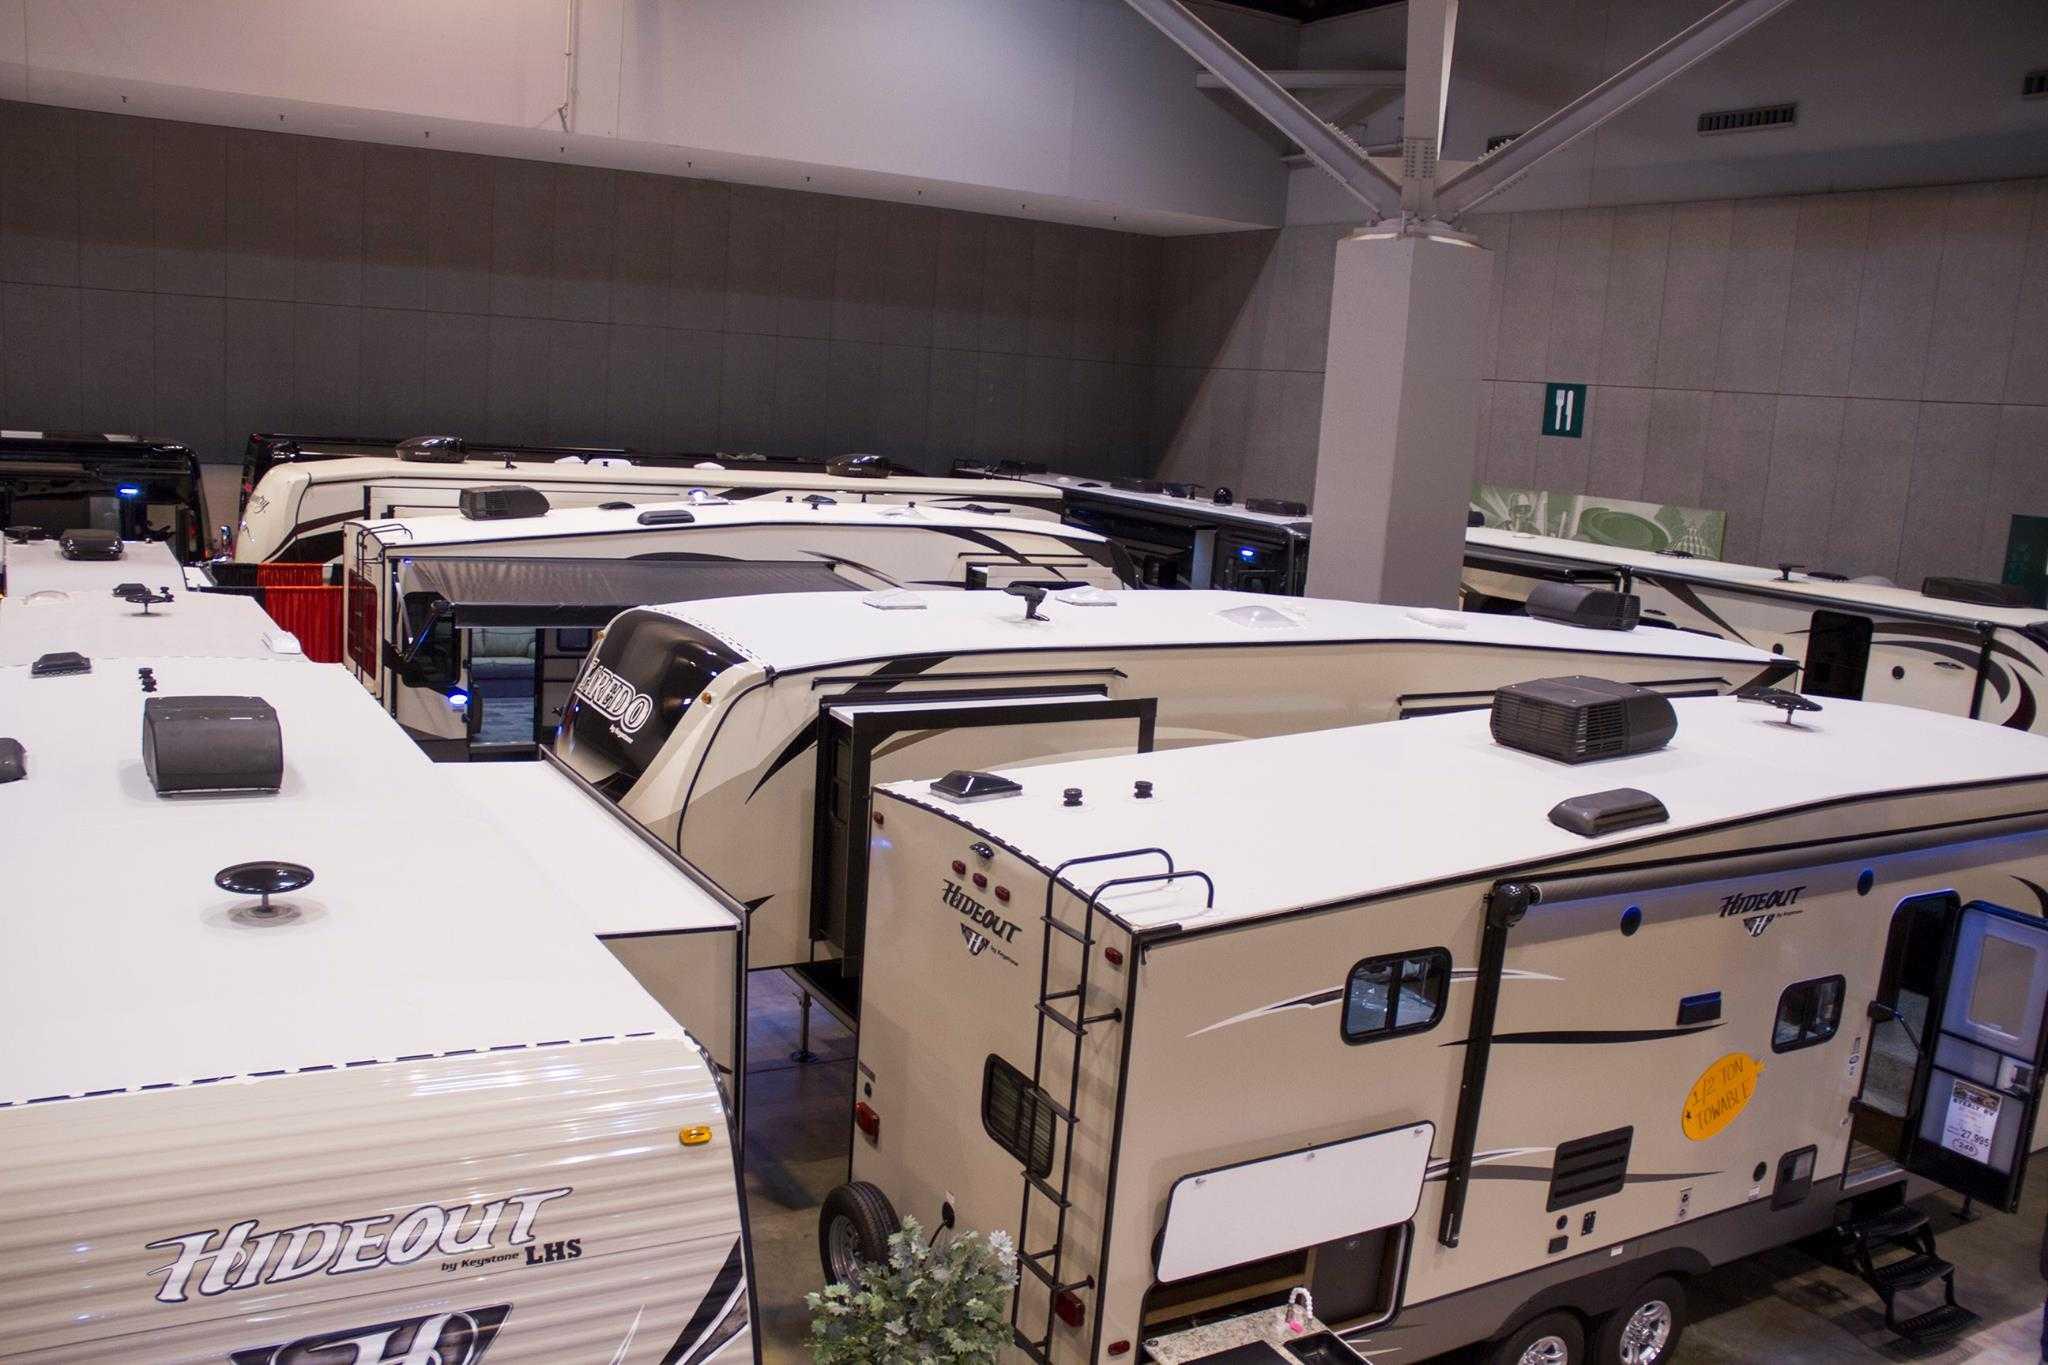 RV Vacation And Travel Show (Feb 2020), St Louis RV Vacation And Travel Show, St. Louis USA ...